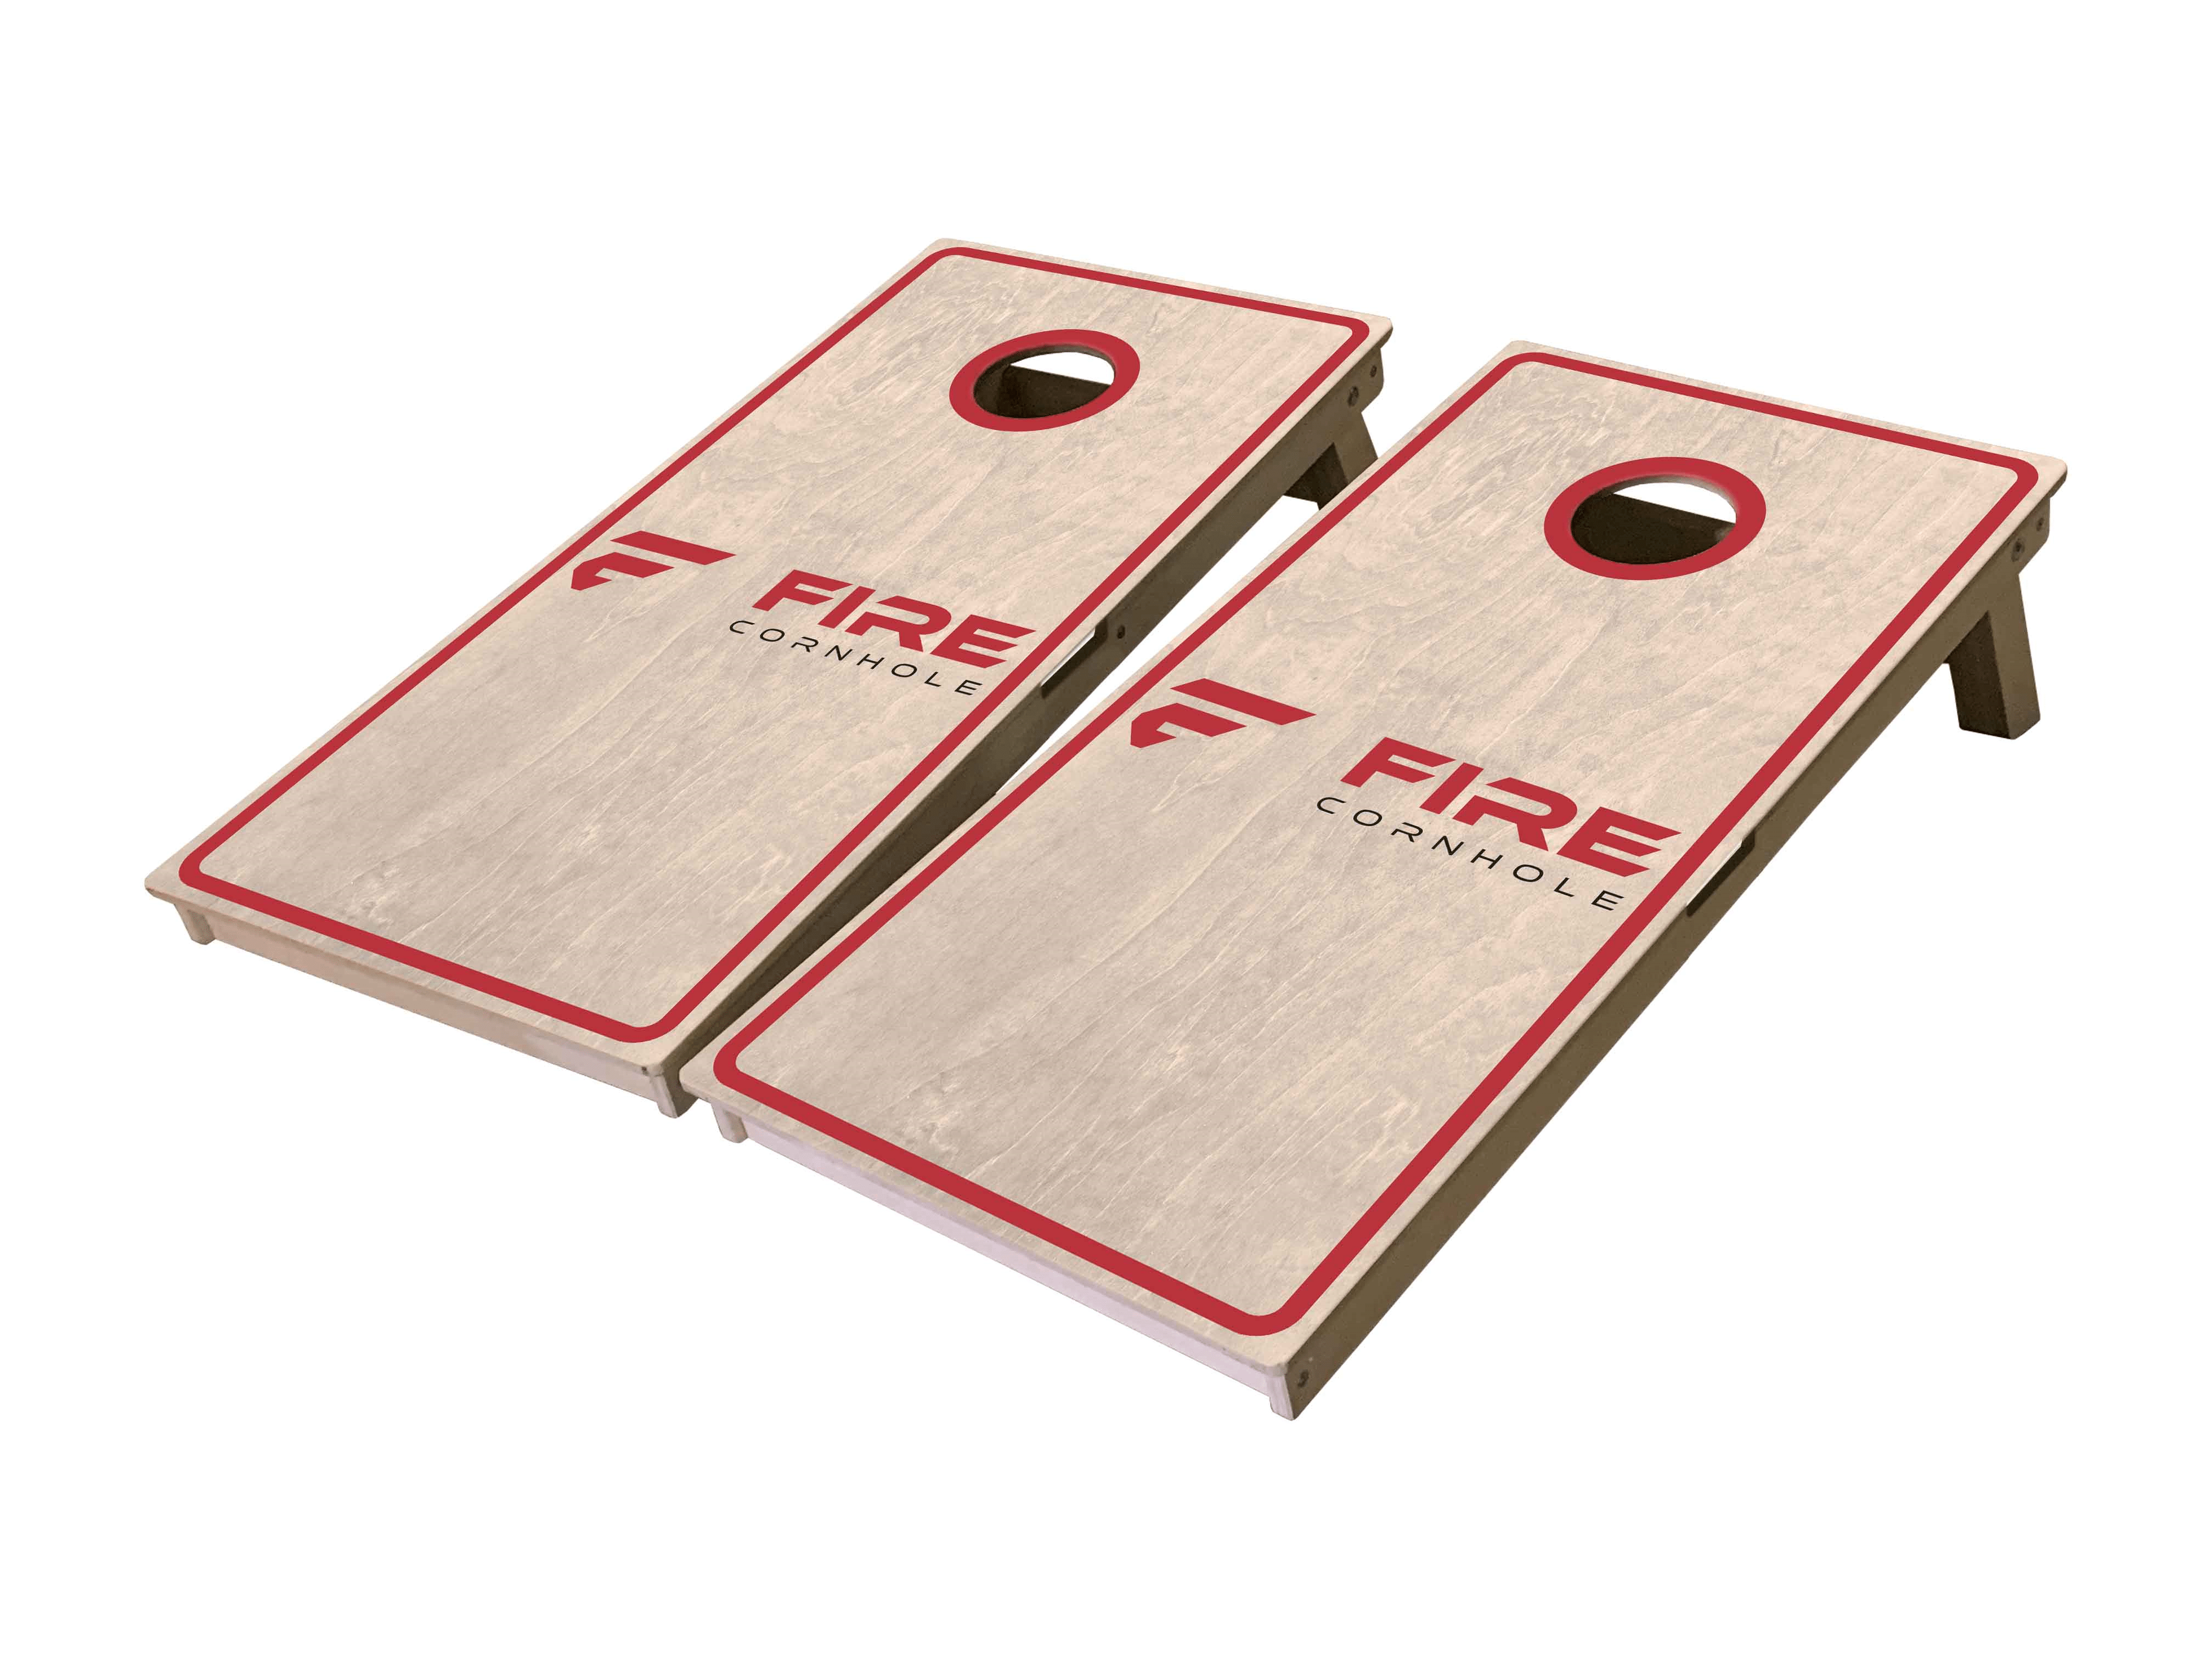 Fire Cornhole boards with natural wood finish